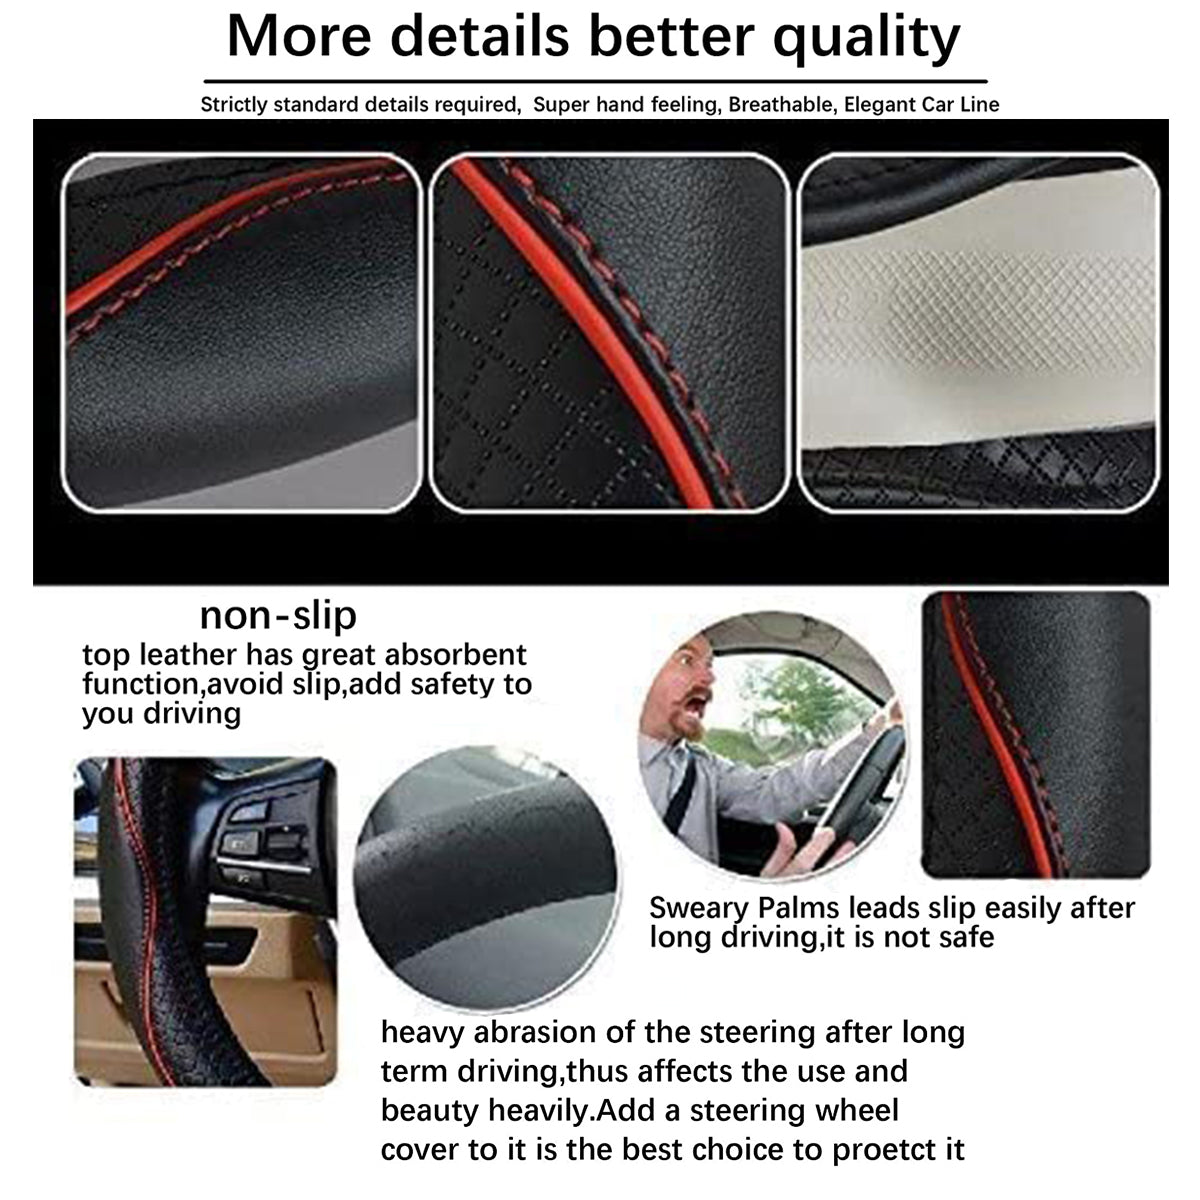 Car Steering Wheel Cover, Custom For Your Cars, Anti-Slip, Safety, Soft, Breathable, Heavy Duty, Thick, Full Surround, Sports Style, Car Accessories HA18990